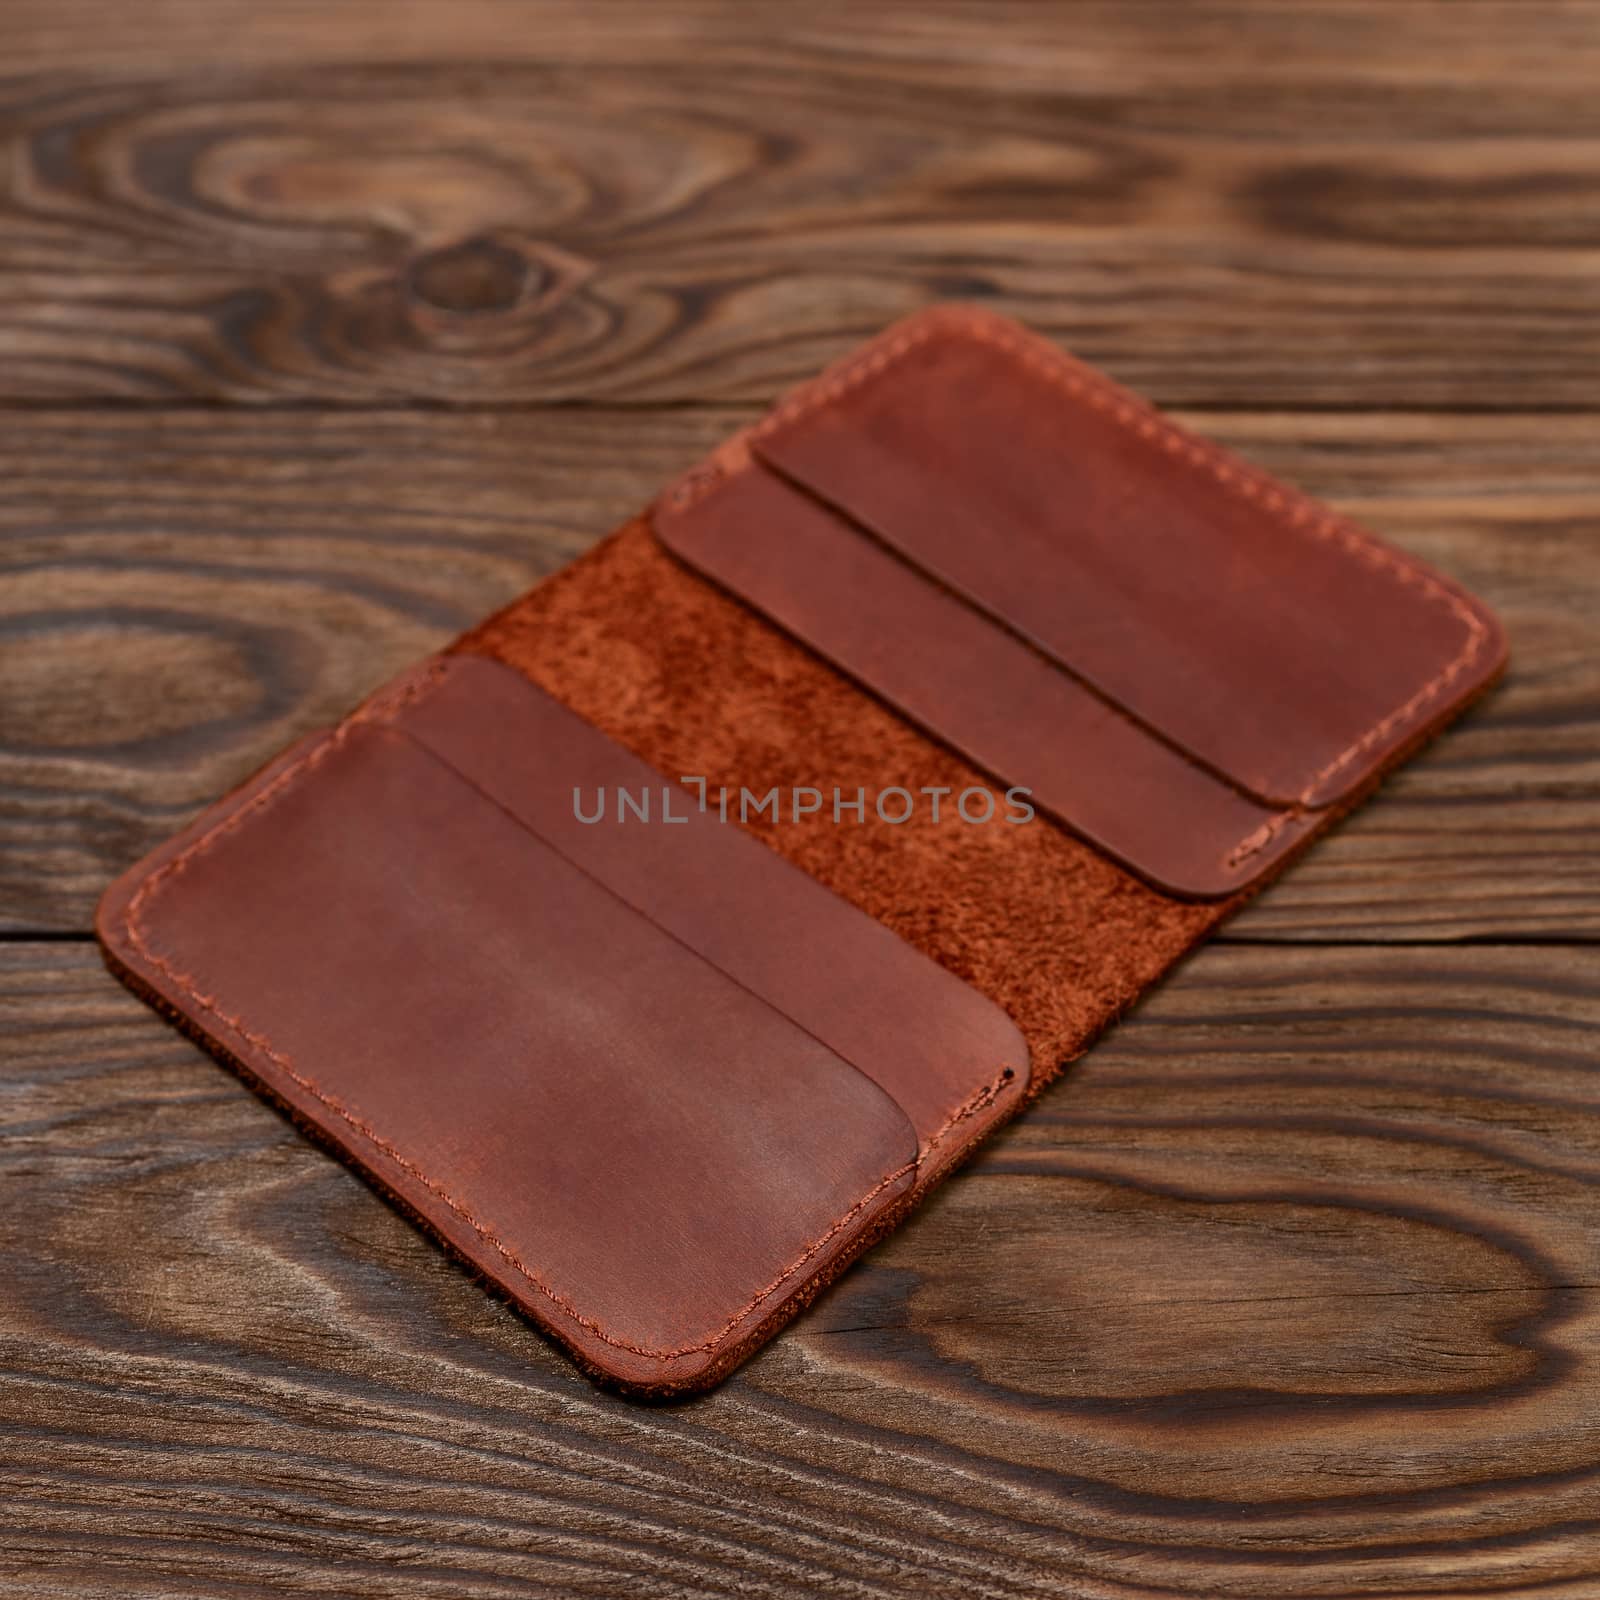 Handmade ginger colour leather cardholder on wooden background. Cardholder have 4 pockets for cards. Stock photo with soft focus background. by alexsdriver